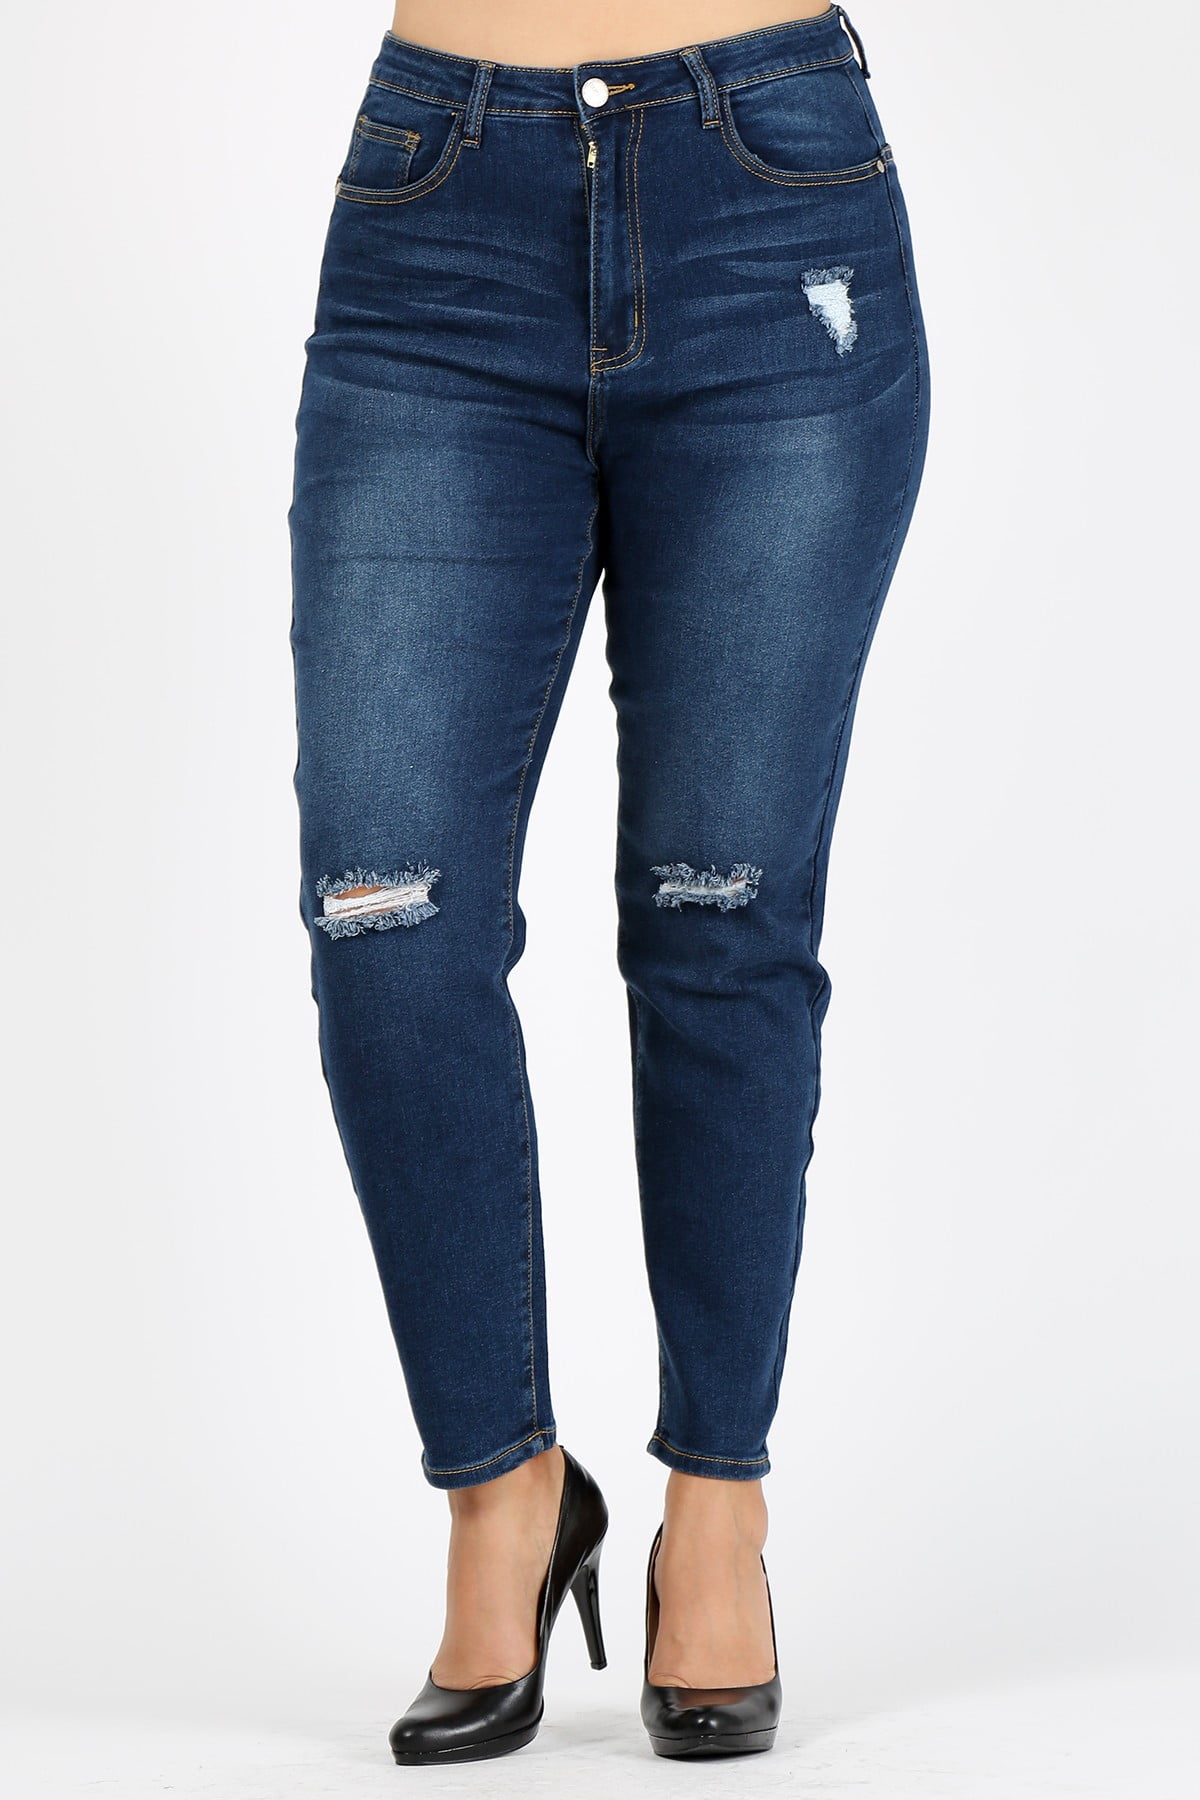 Plus size denim jeans in a whiskered vintage wash with a high waist ...